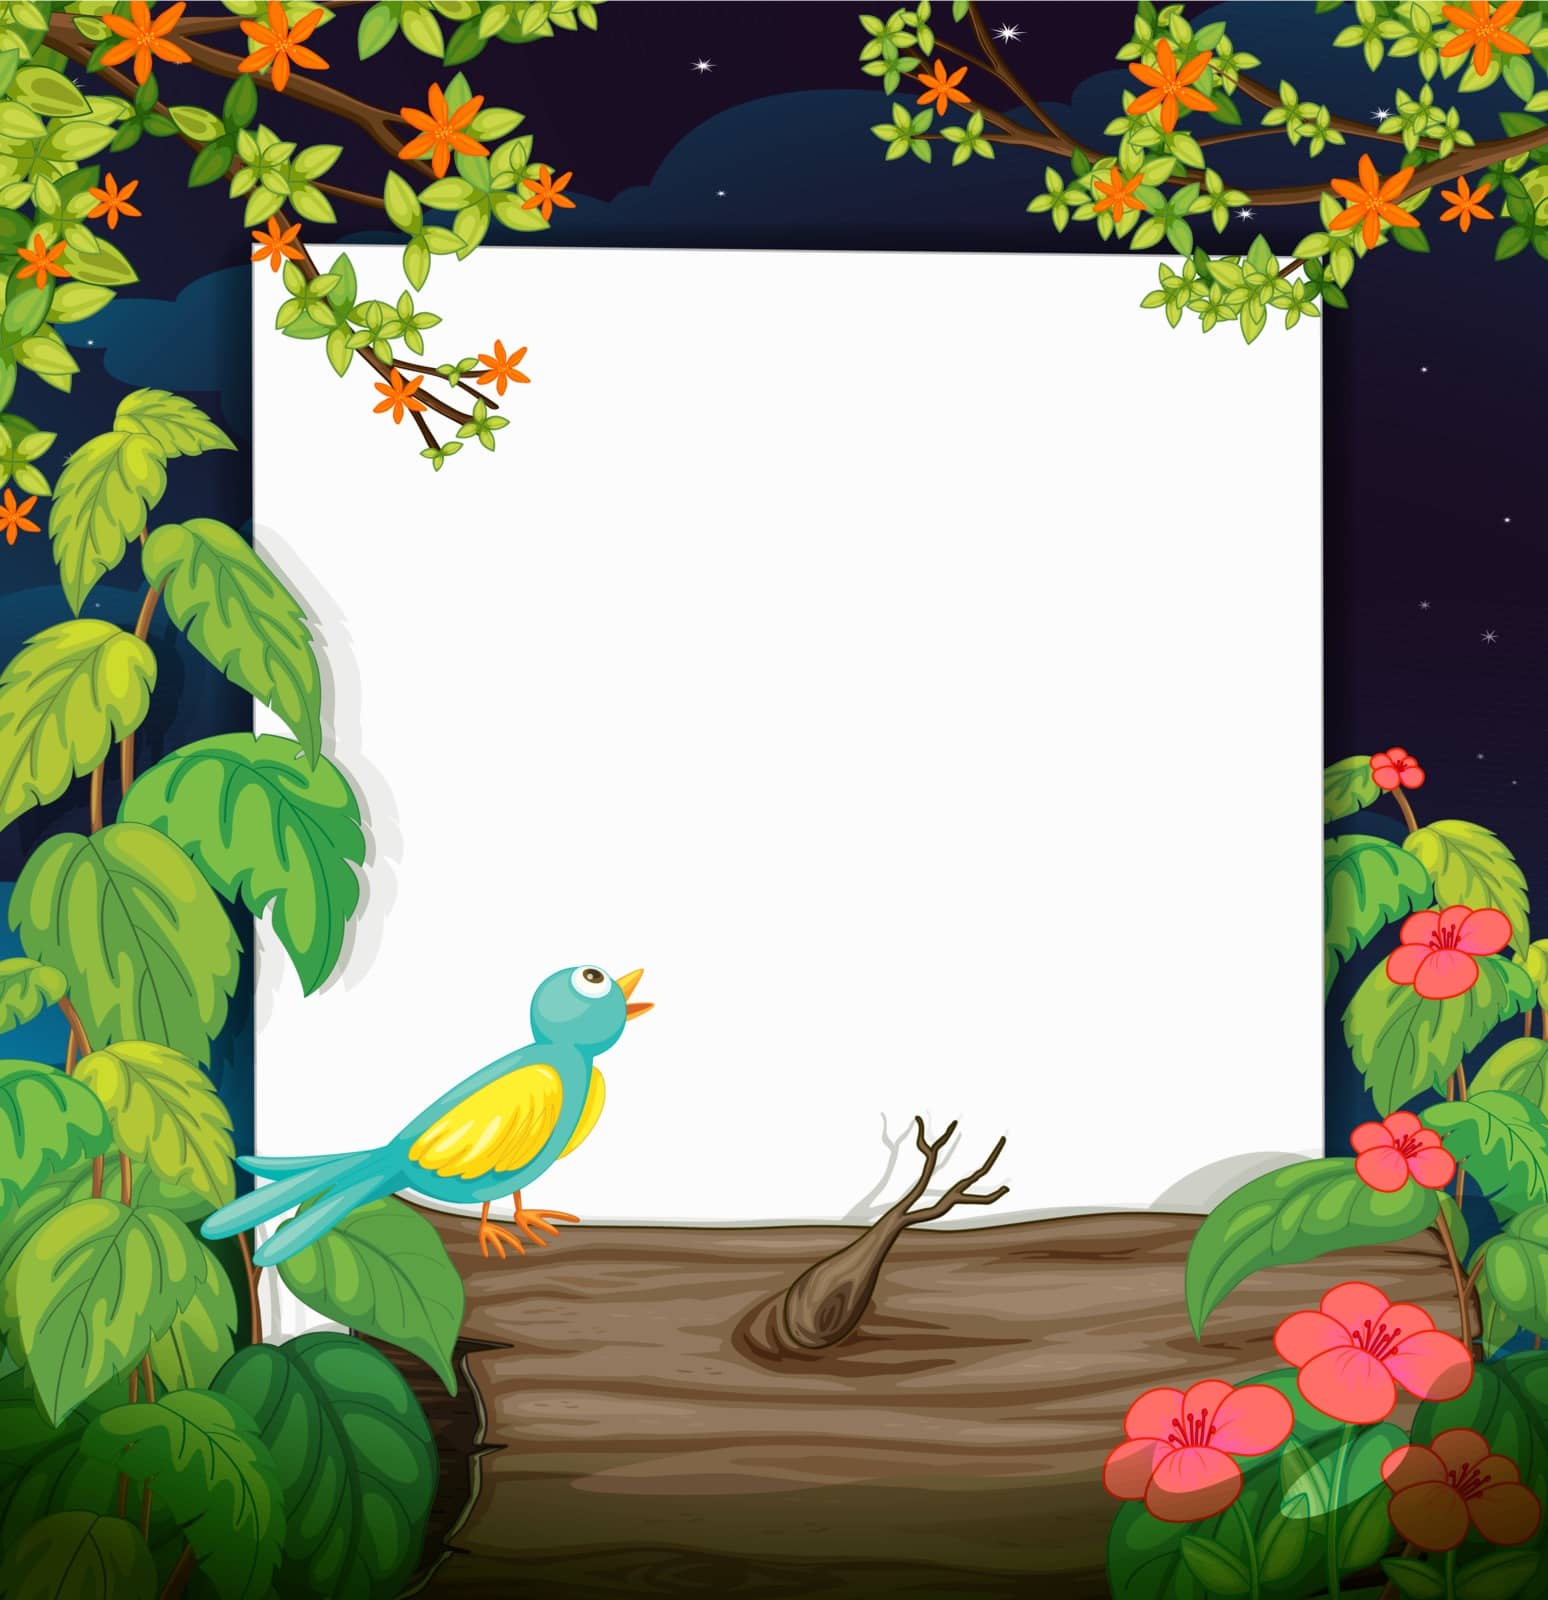 Illustration of a bird and a white board in a beautiful dark night